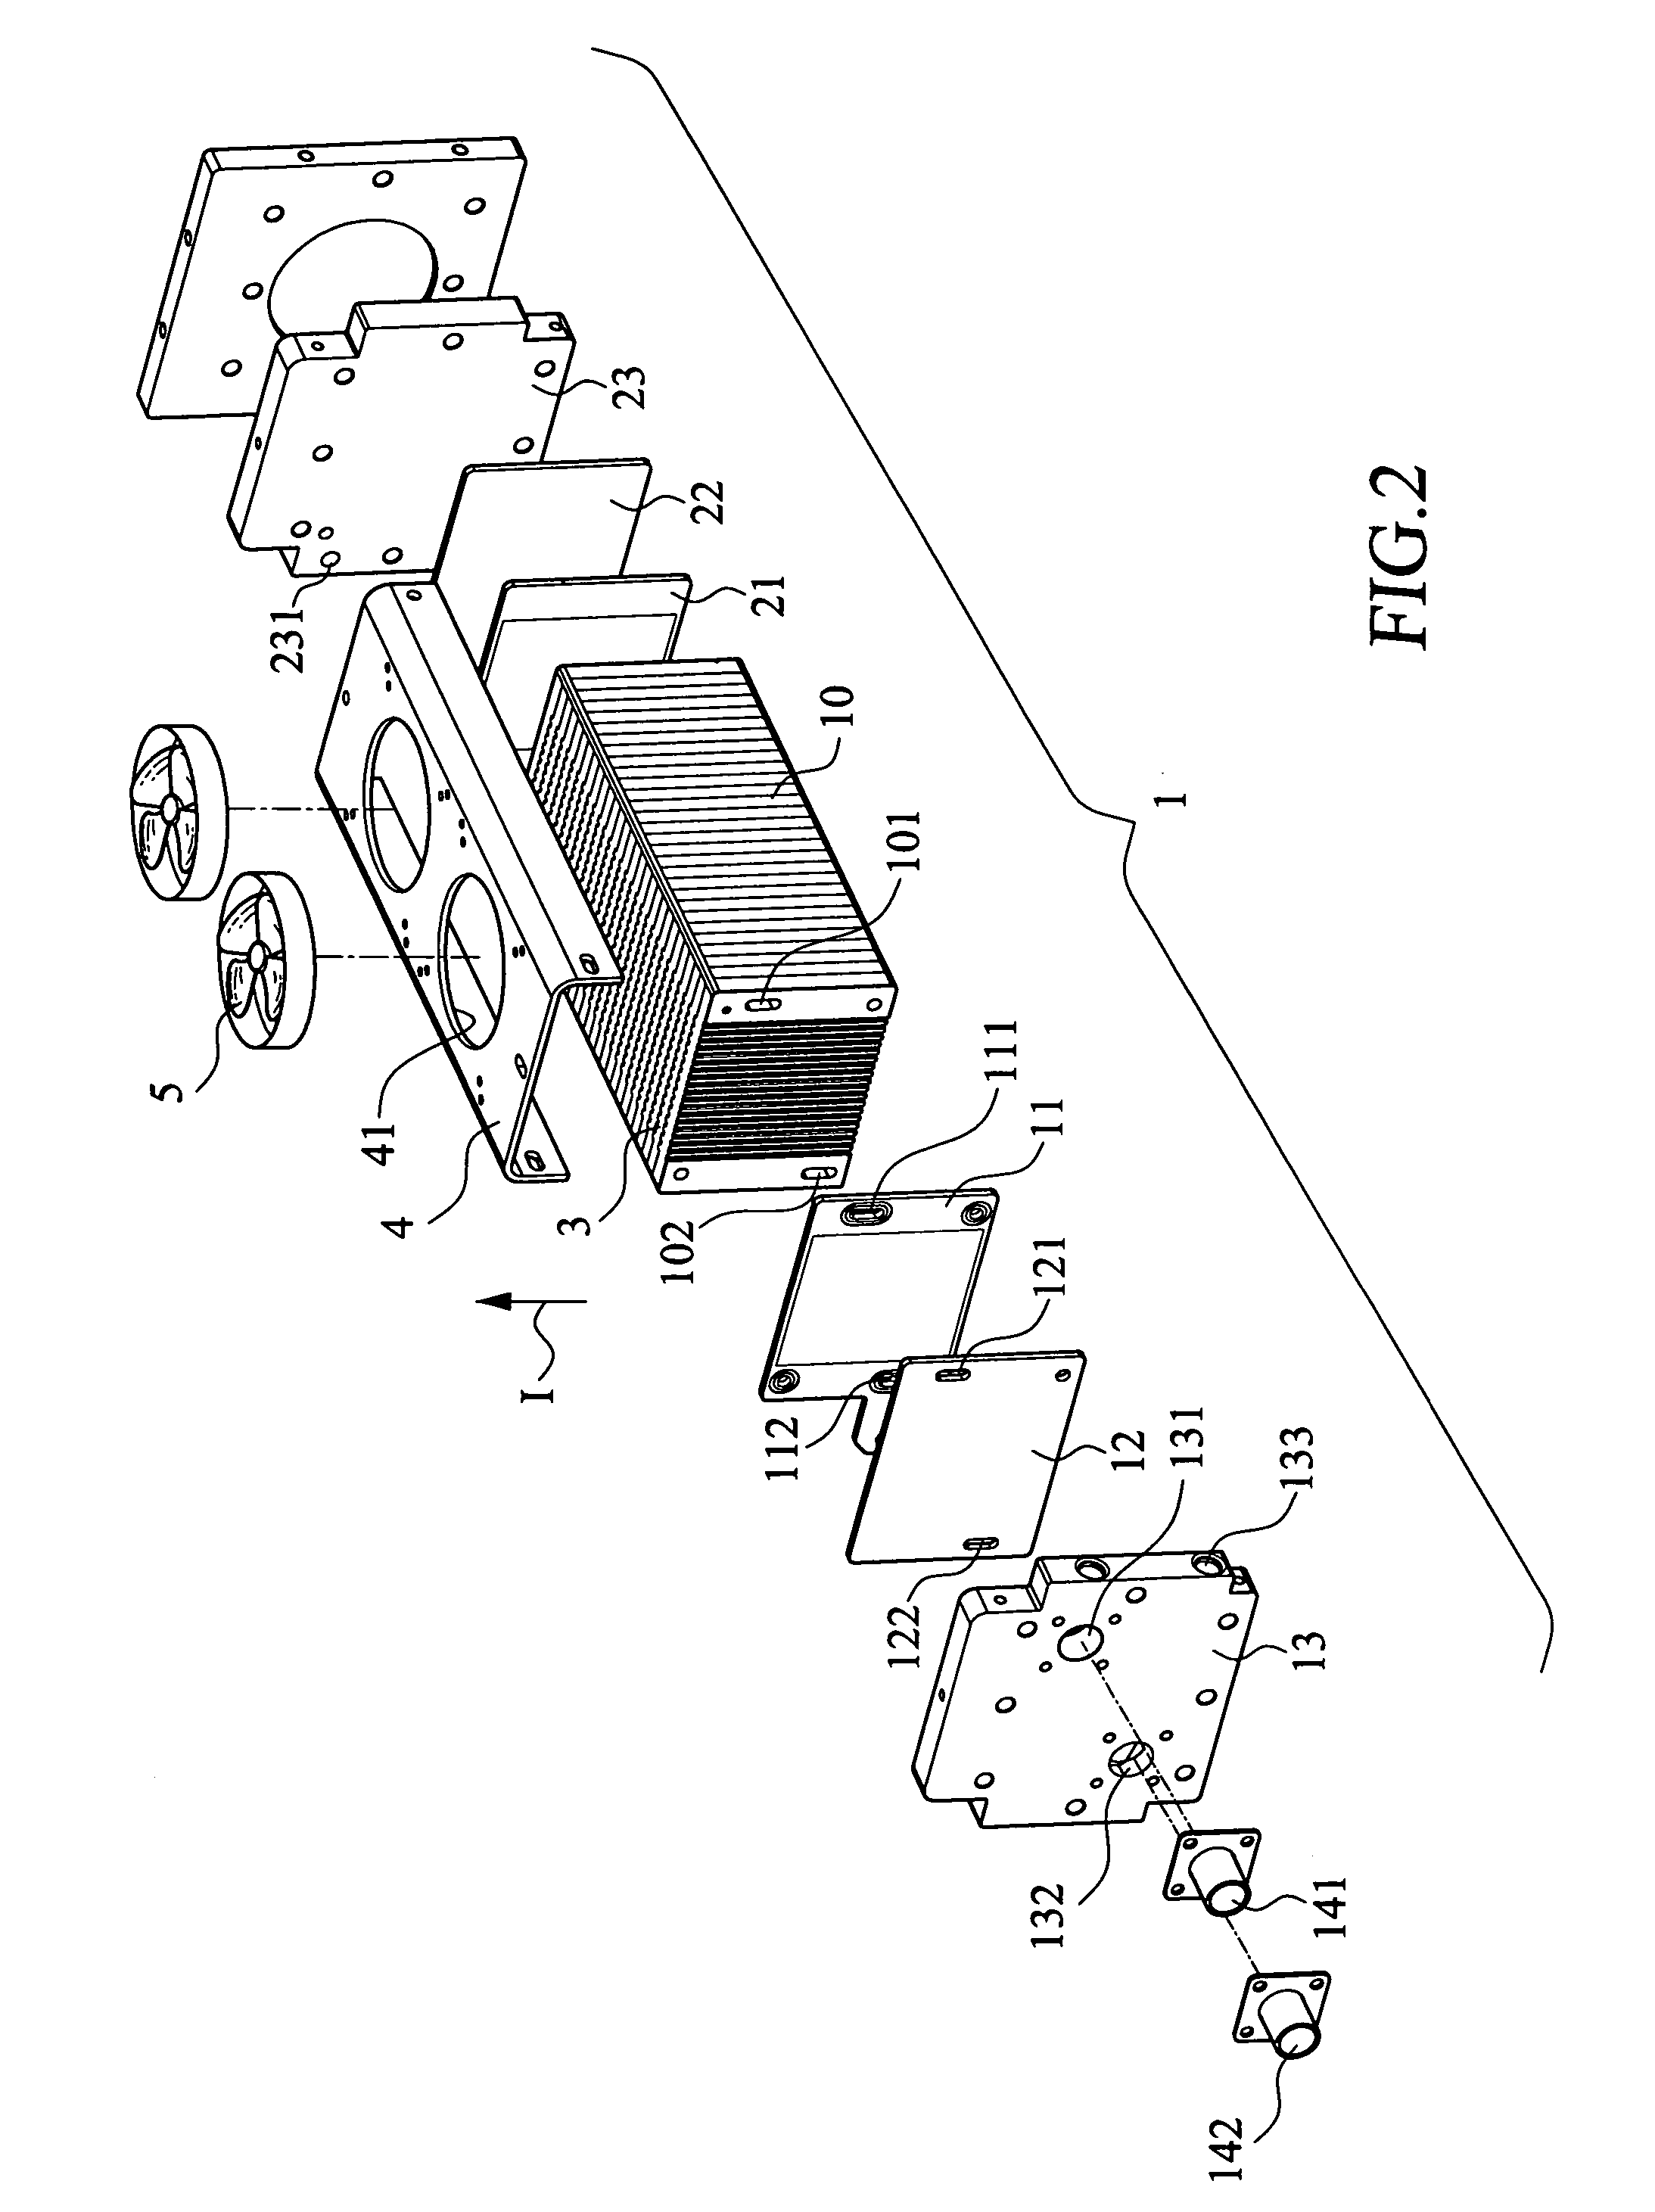 Cooling of air-cooled fuel cell system